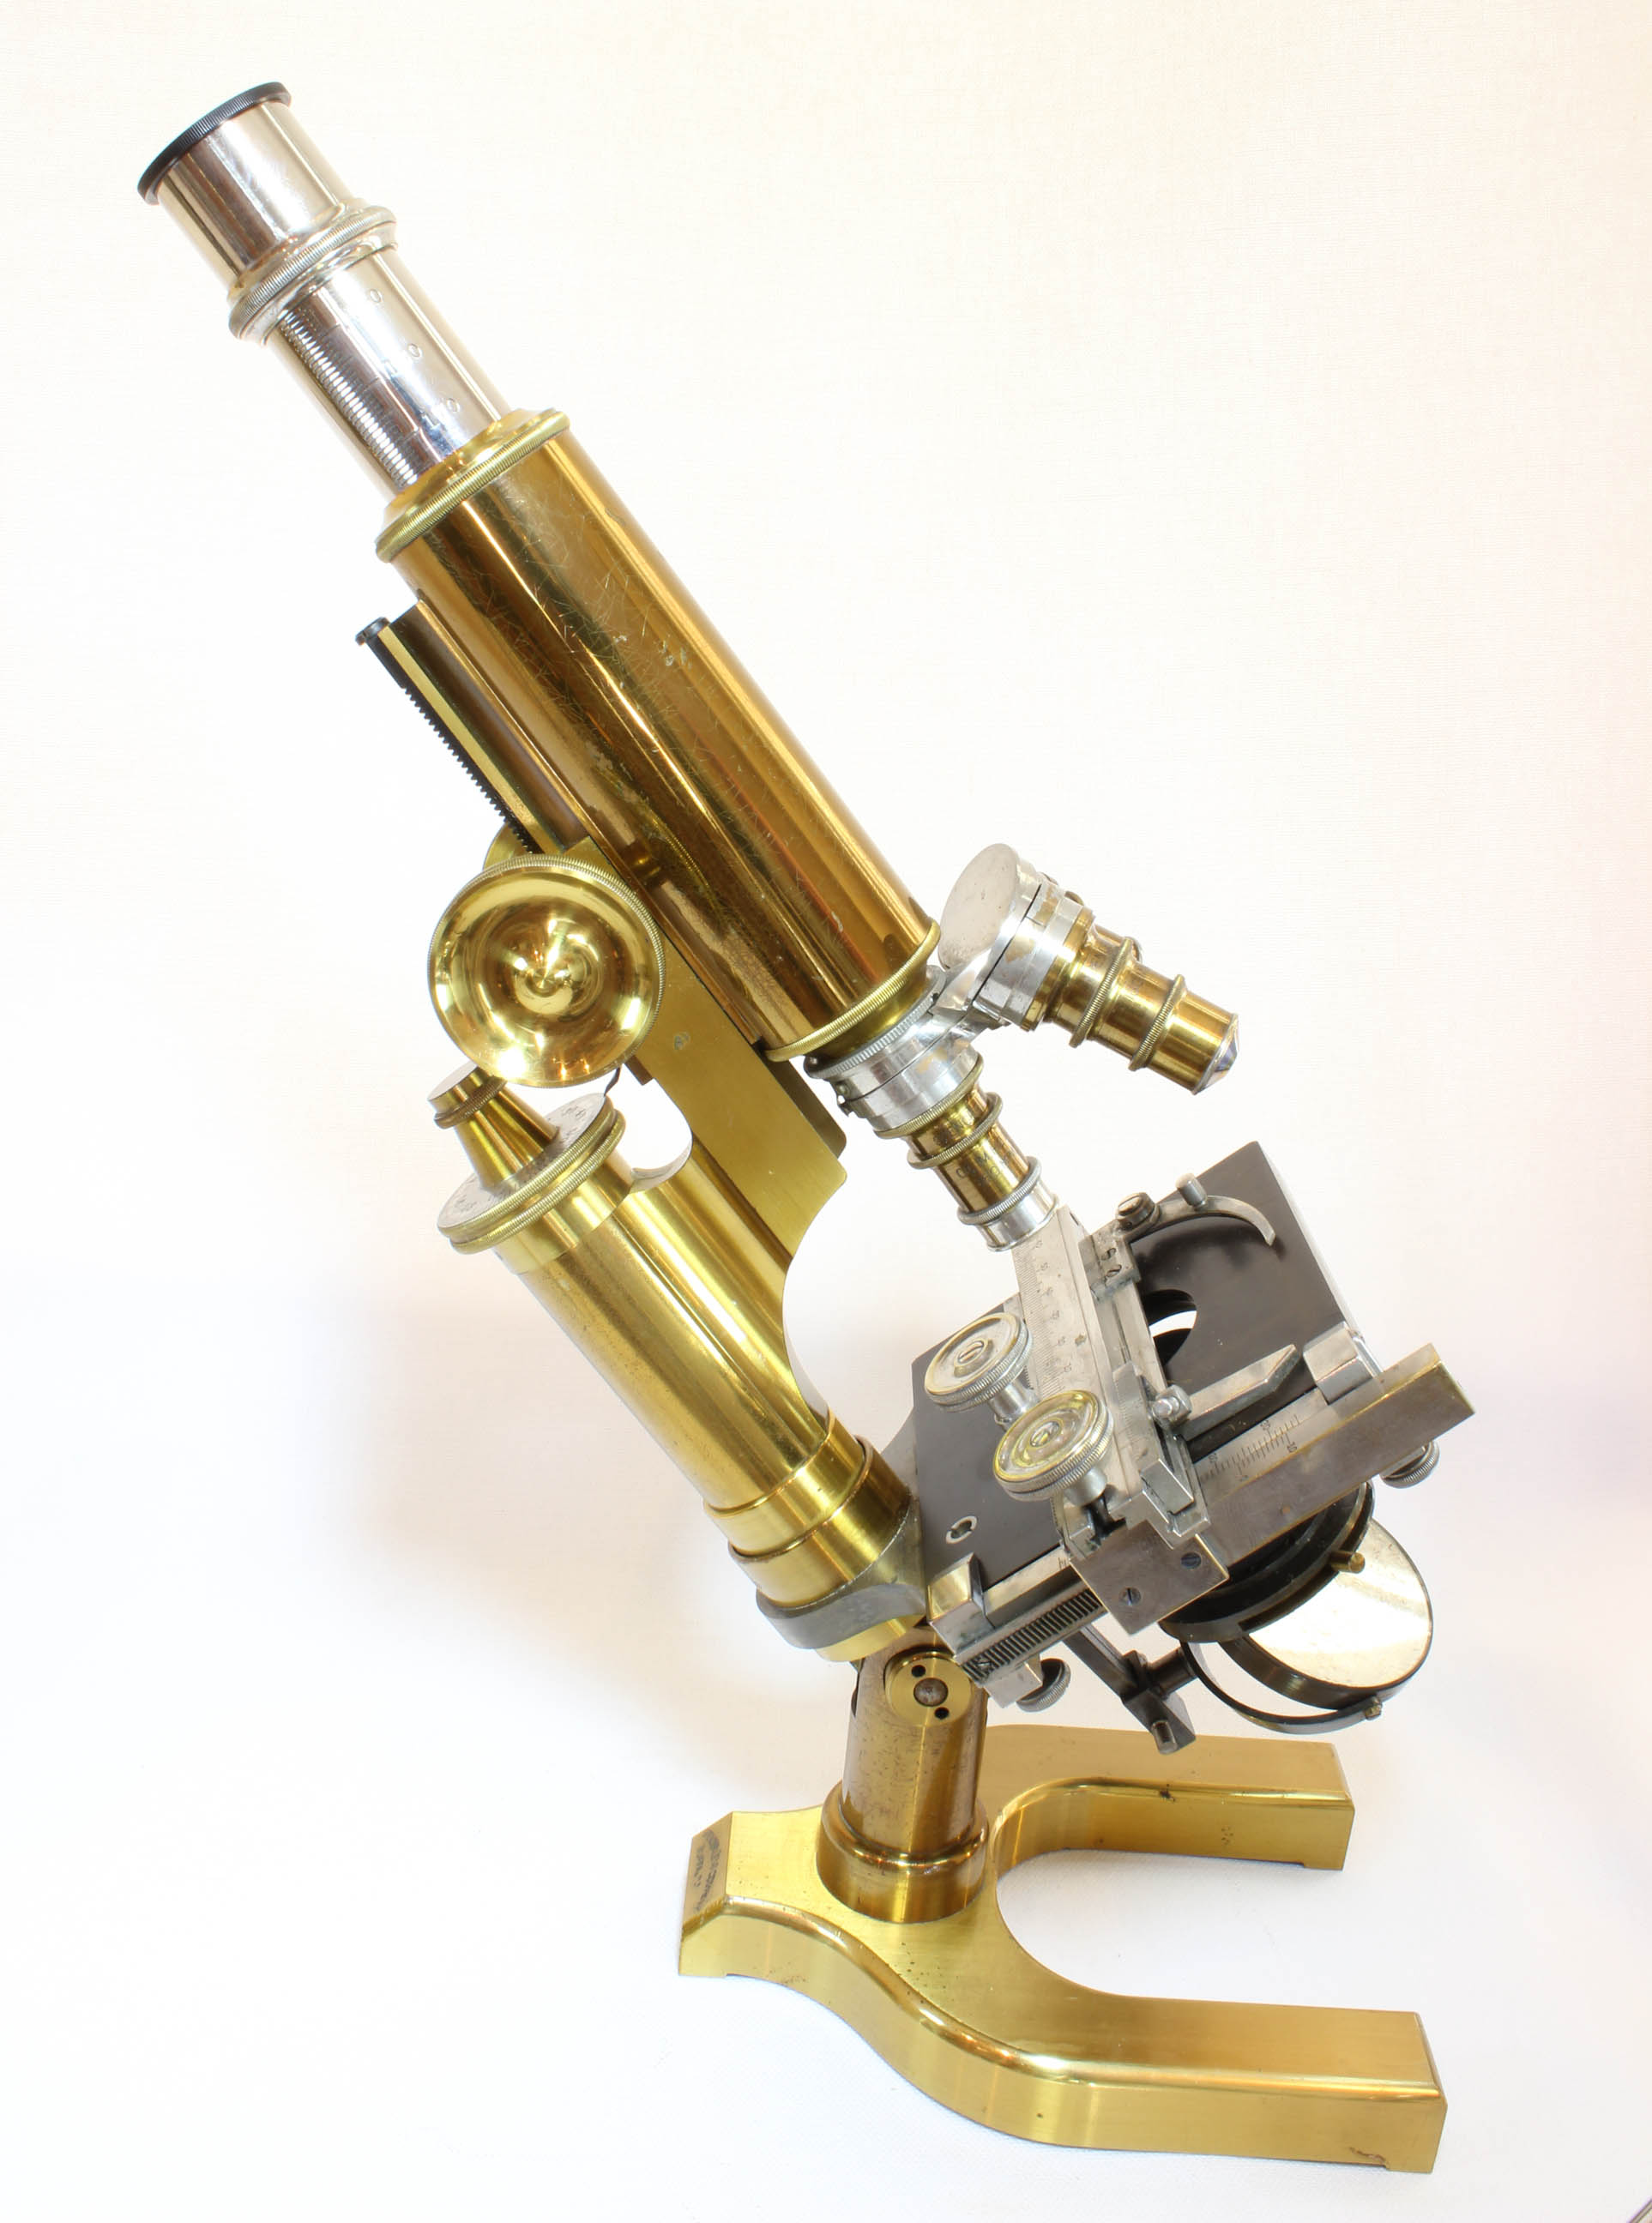 Spencer Number 1 microscope